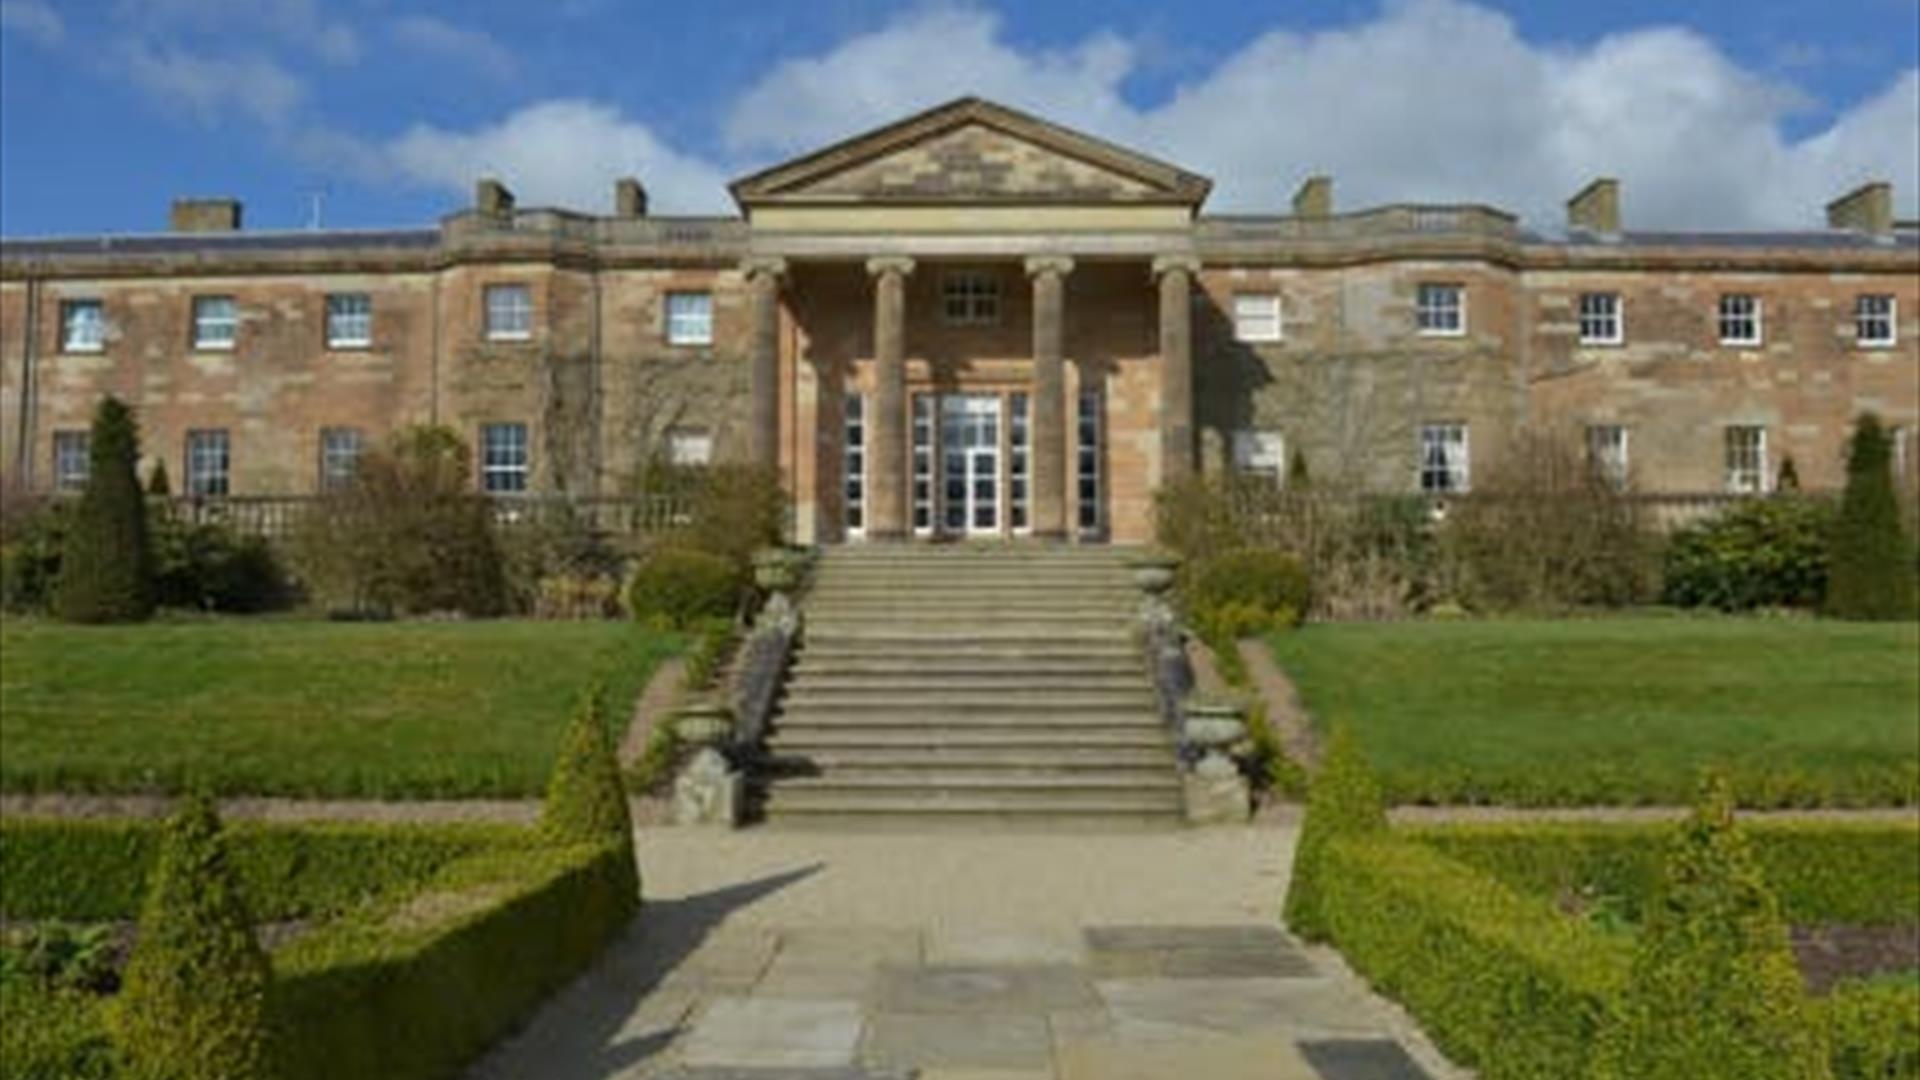 Image shows front of Hillsborough Castle and grounds